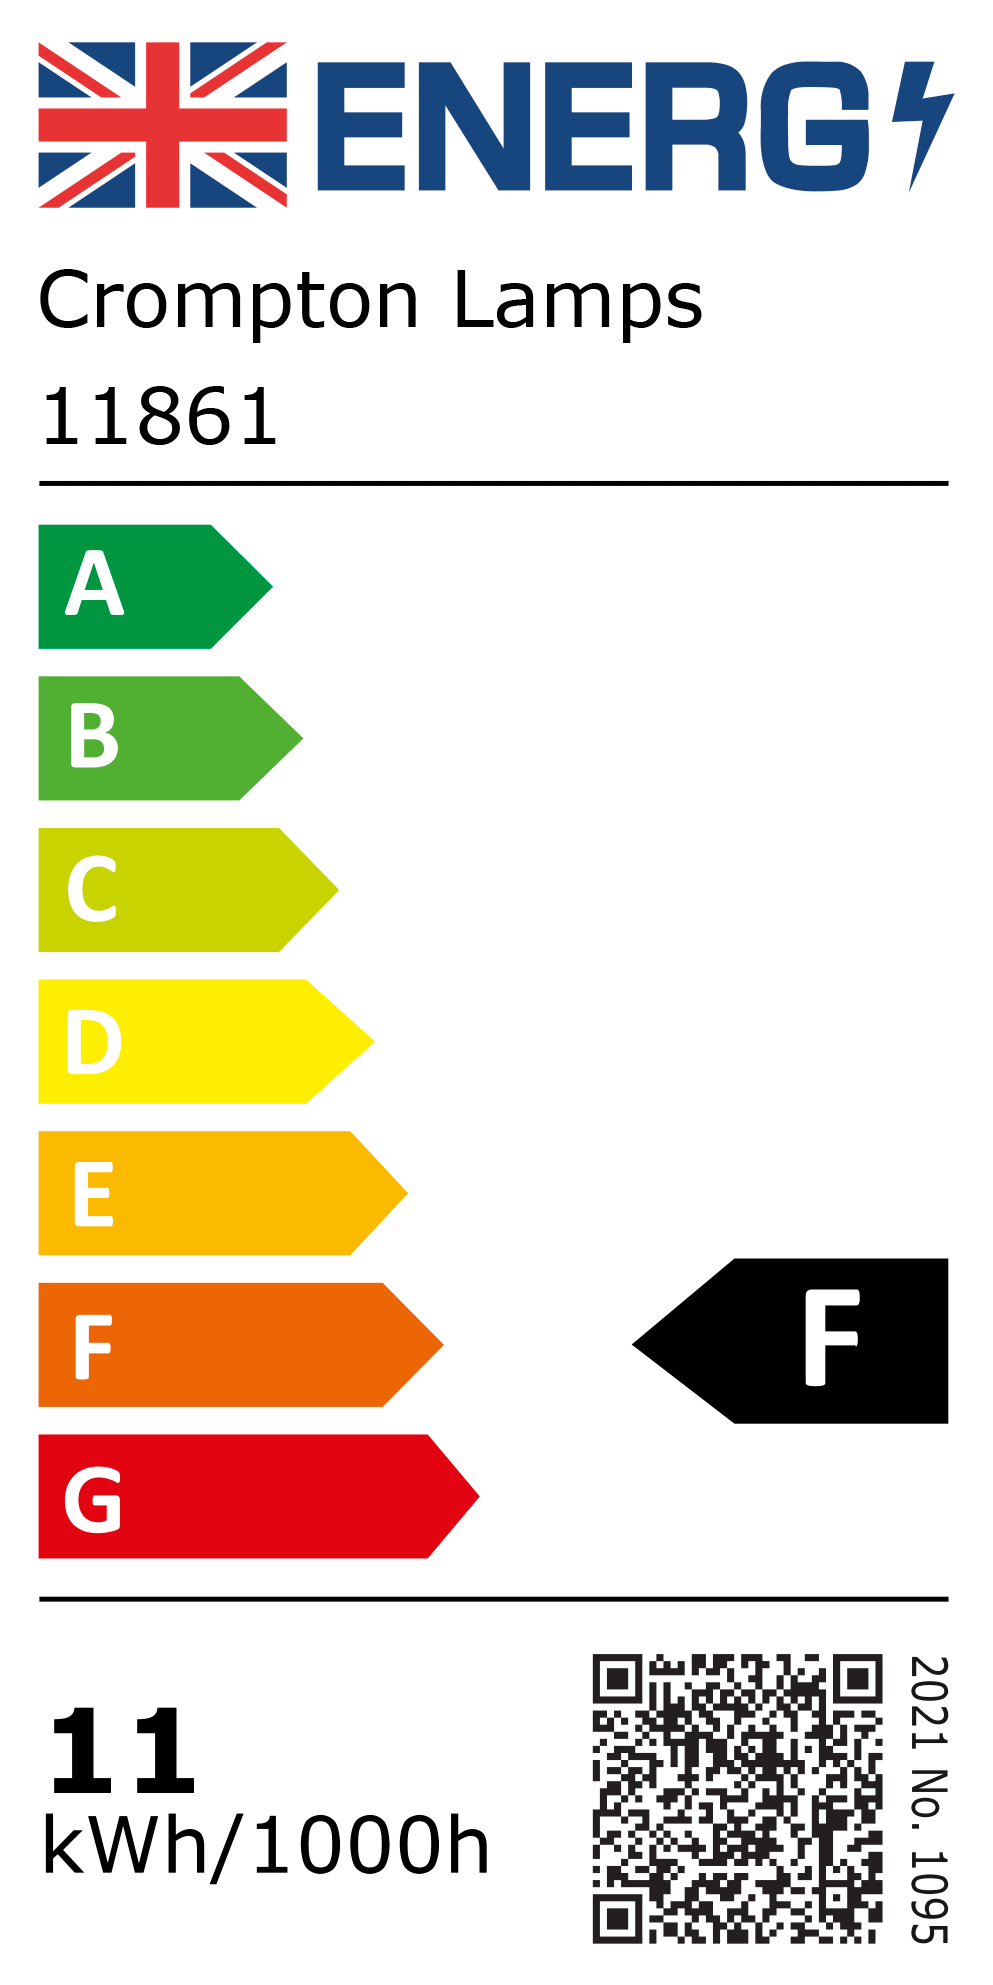 New 2021 Energy Rating Label: Stock Code 11861